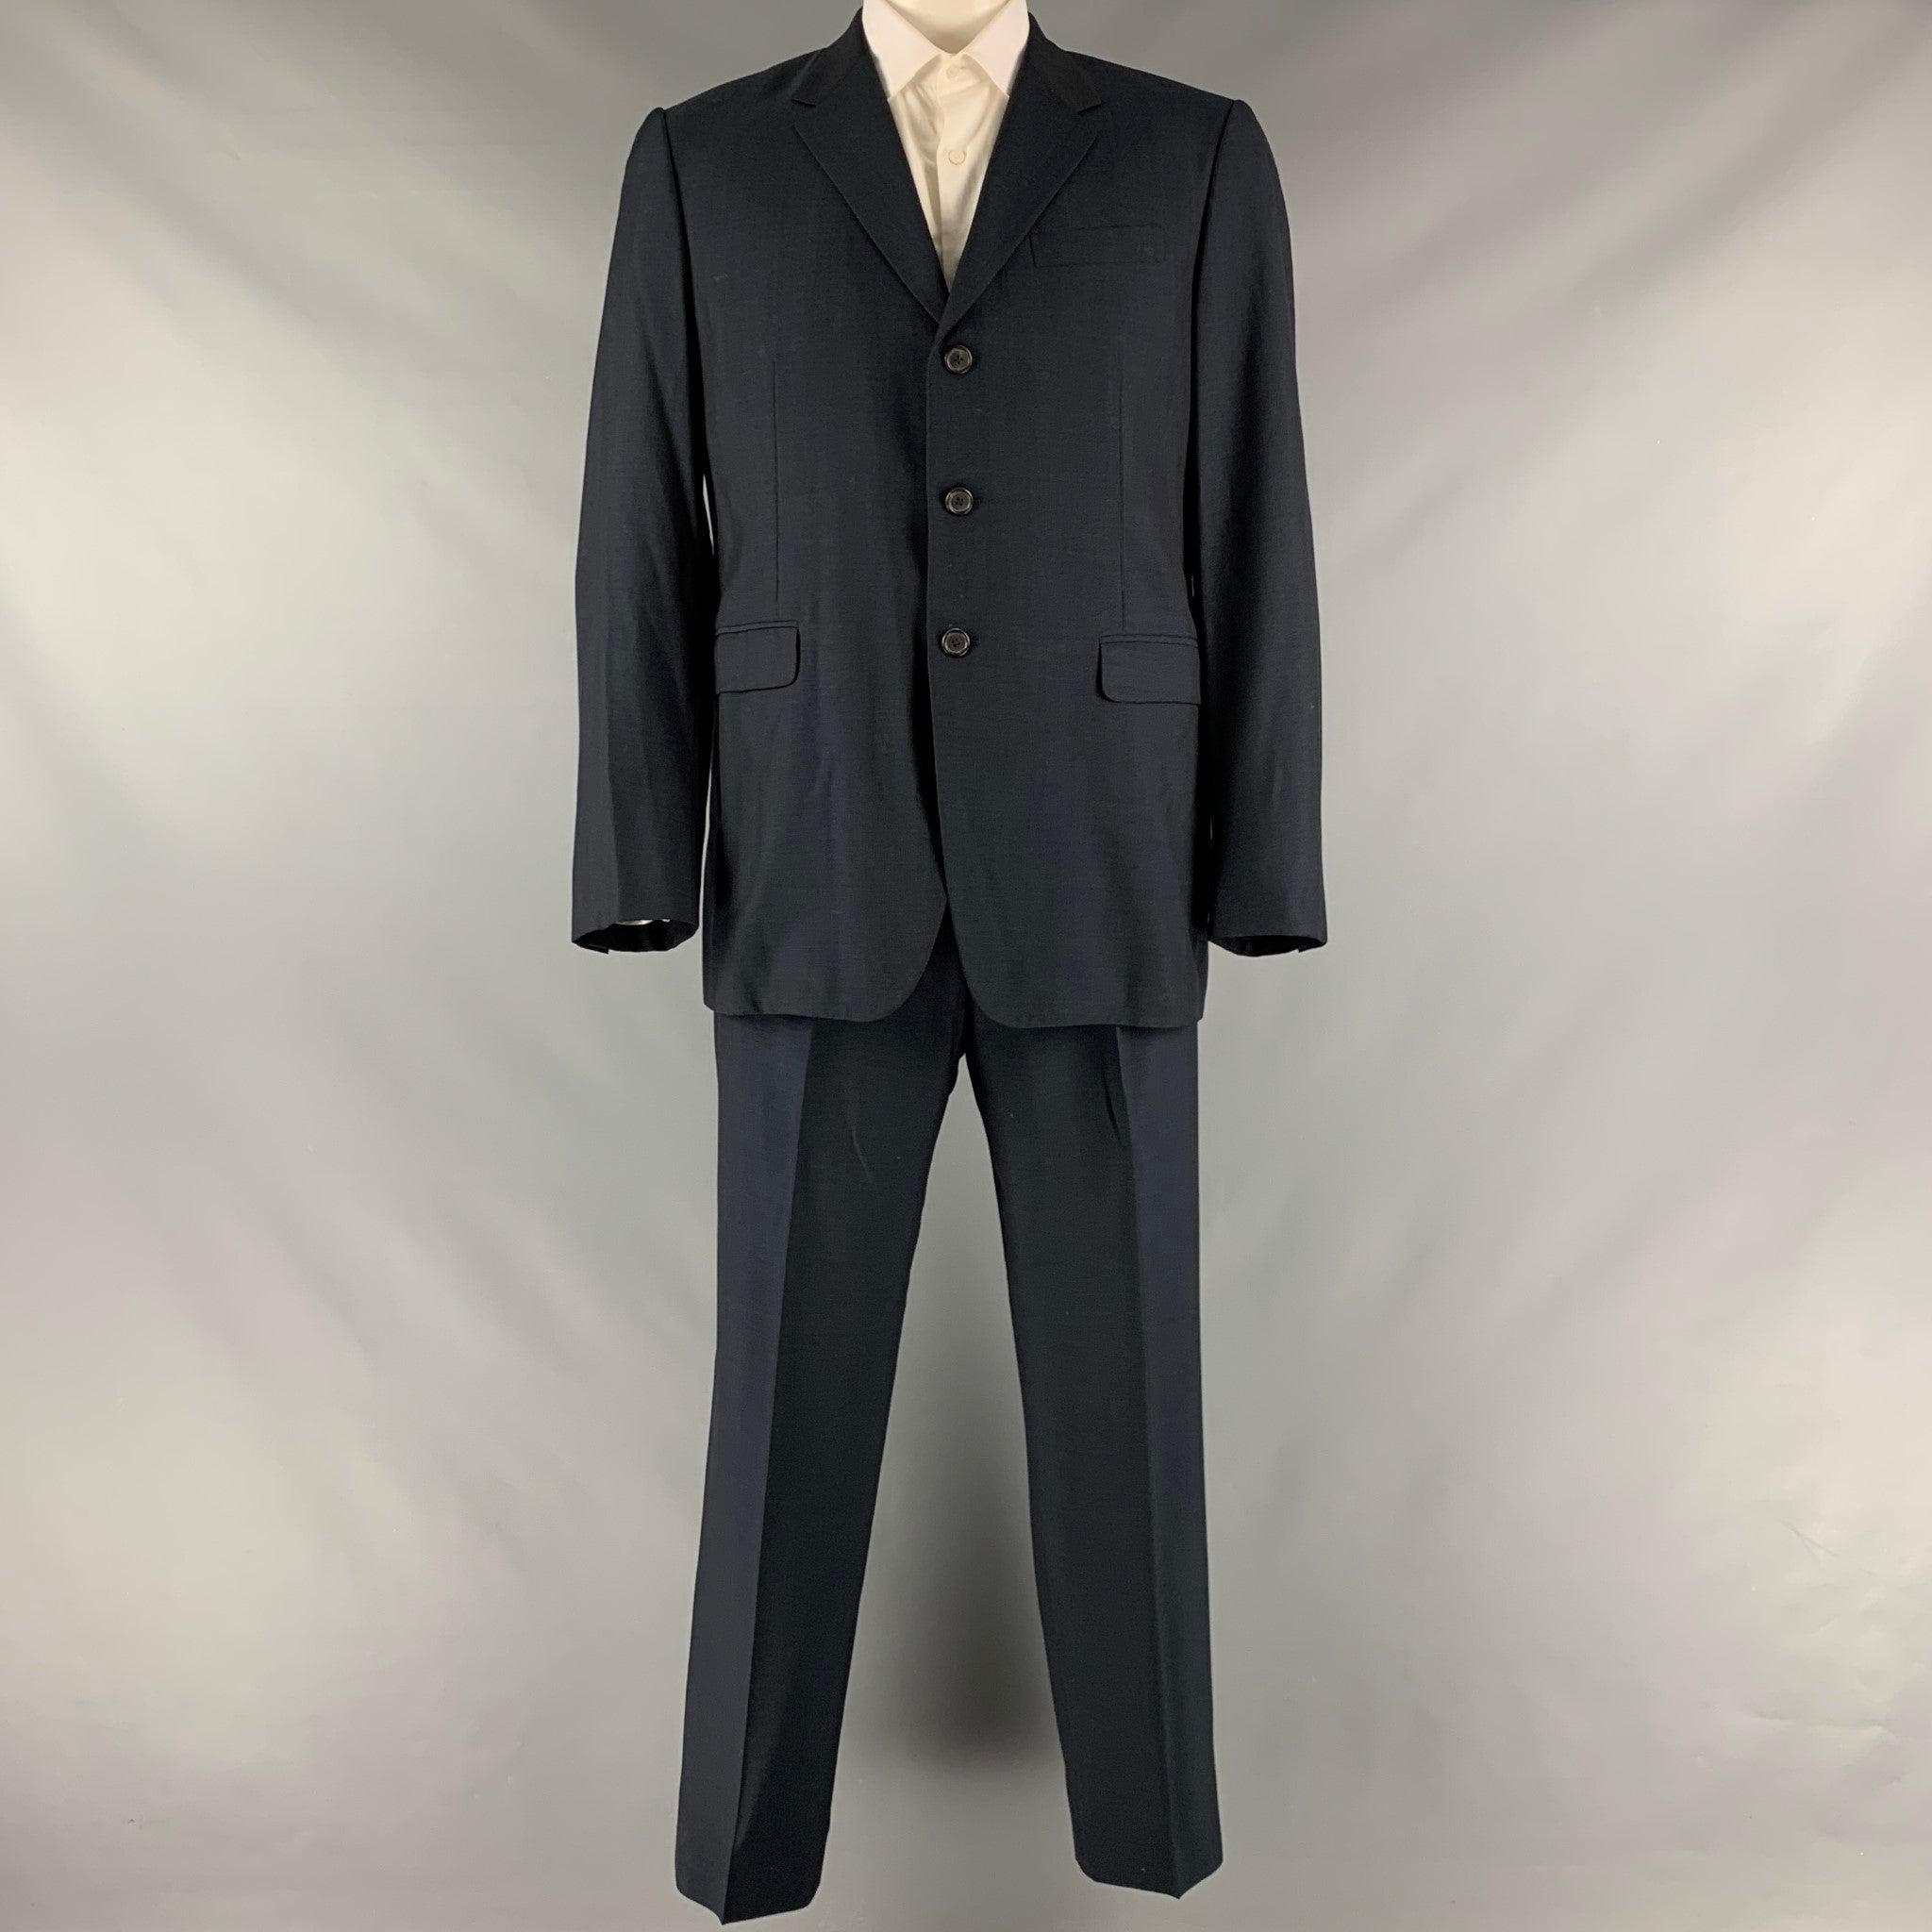 PRADA suit comes in a navy virgin wool and silk woven material with a full line and includes a single breasted, three button sport coat with a notch lapel and matching flat front trousers. Very Good Pre-Owned Condition. 

Marked:   44